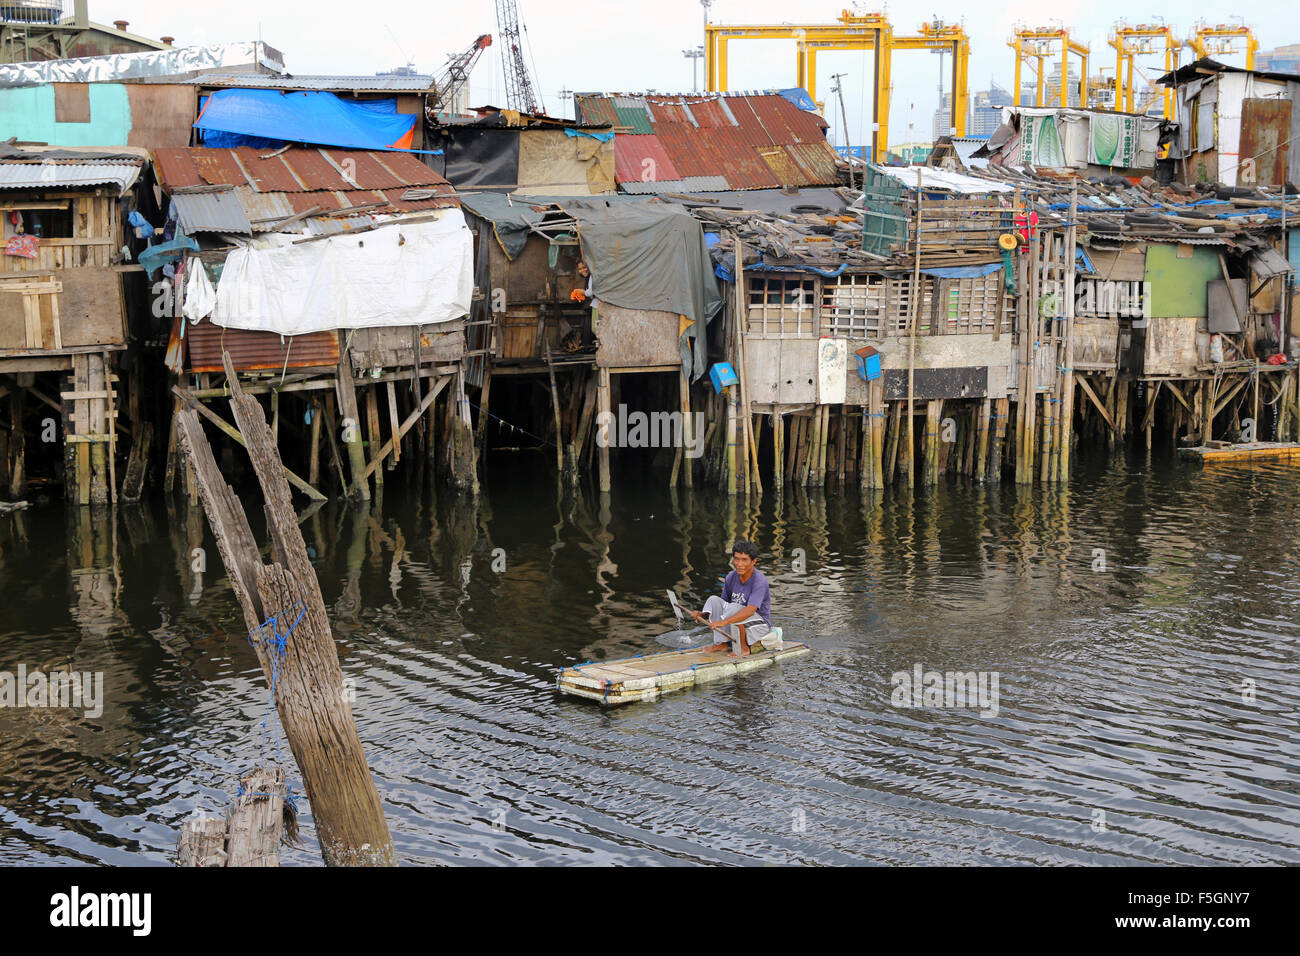 Manila, The Philippines: Resident of a poor neighborhood living in huts on stilts with firewood on a Styrofoam float, Tondo township, Manila, Philippines Stock Photo